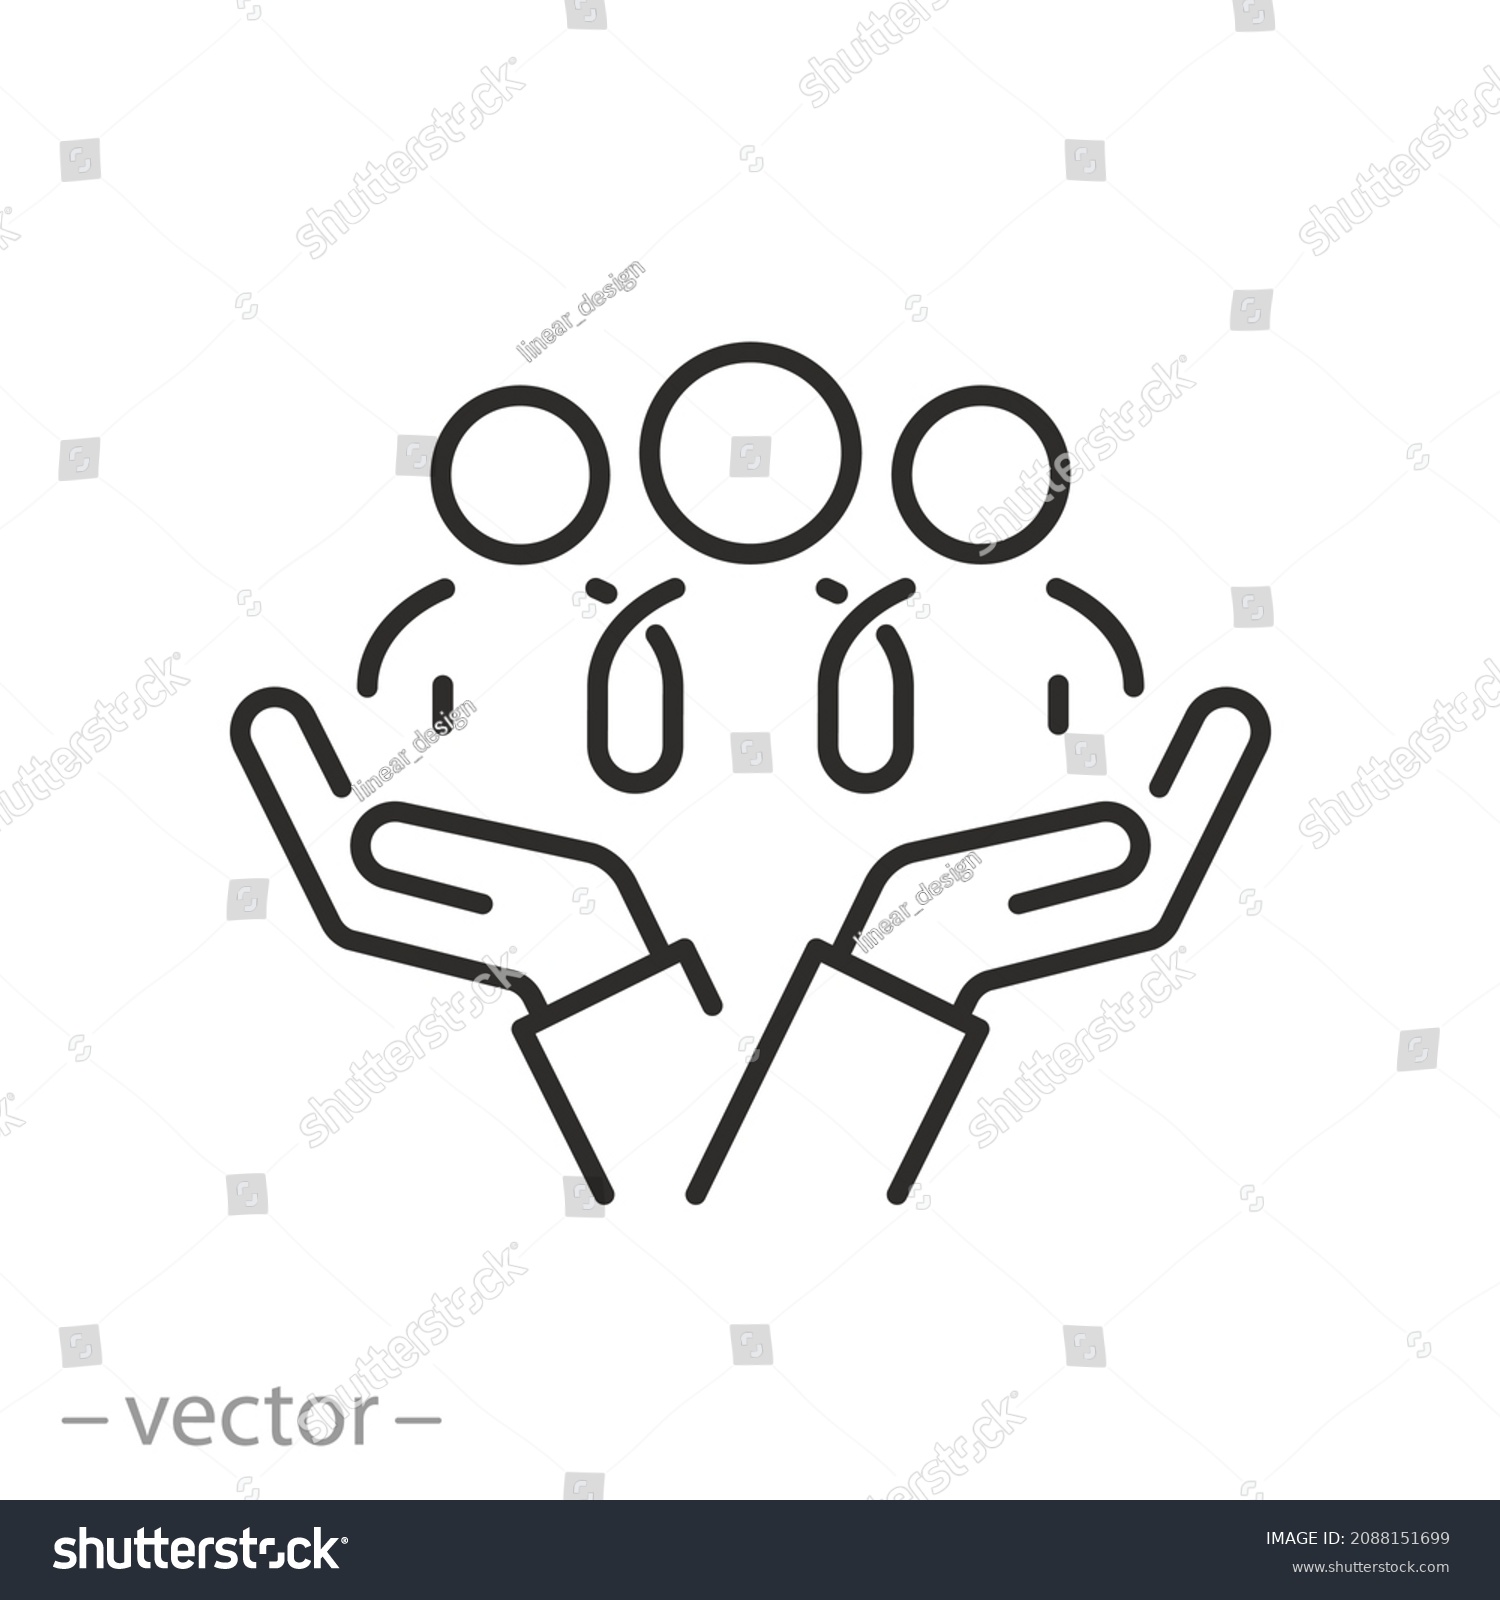 SVG of inclusion social equity icon, help or support employee, gender equality, community care, age and culture diversity, people group save, thin line symbol - editable stroke vector illustration svg